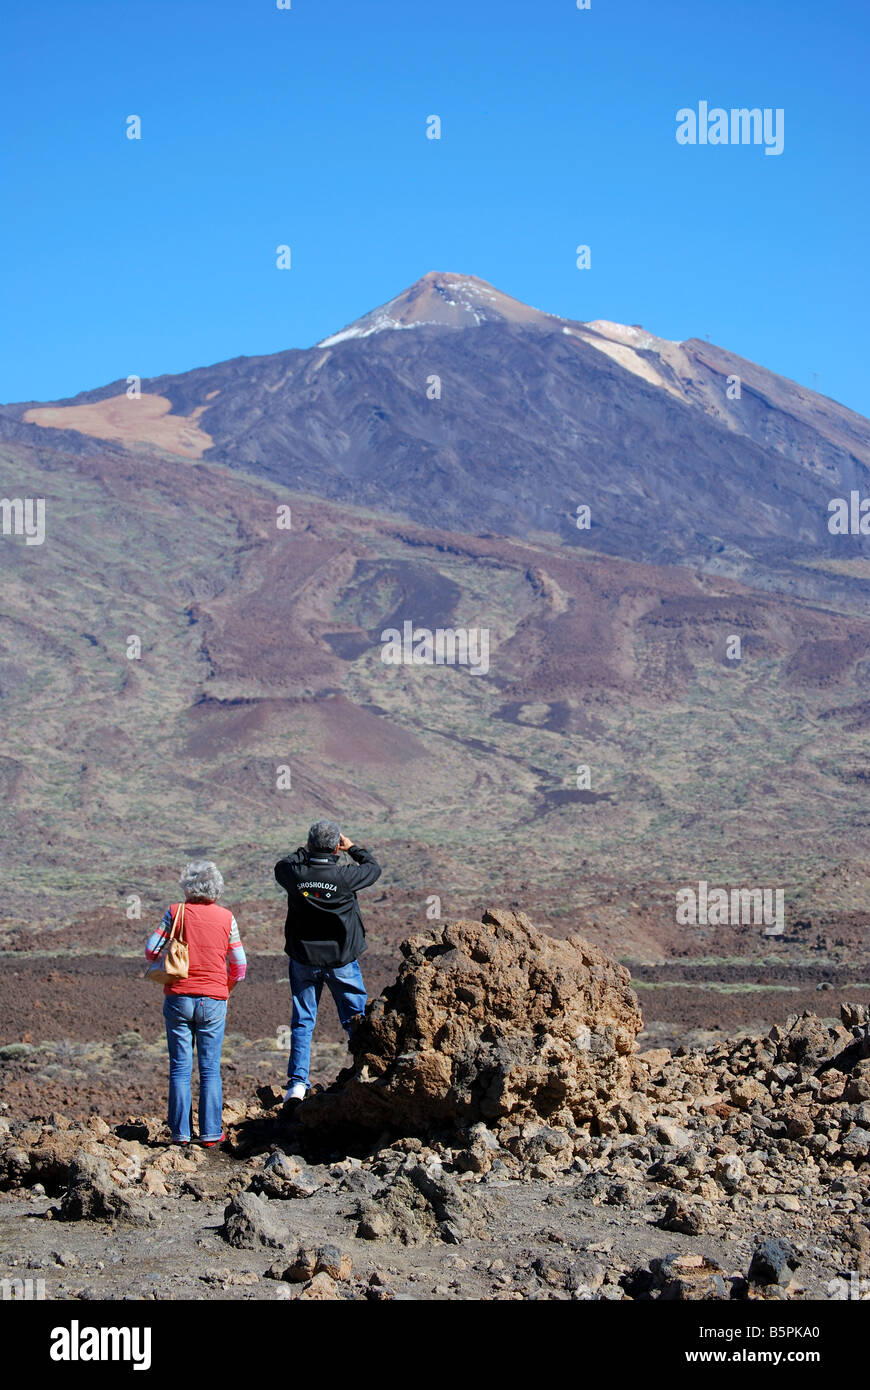 View of Mt.Teide across lava fields, from lookout point, Parque Nacional Del Teide, Tenerife, Canary Islands, Spain Stock Photo